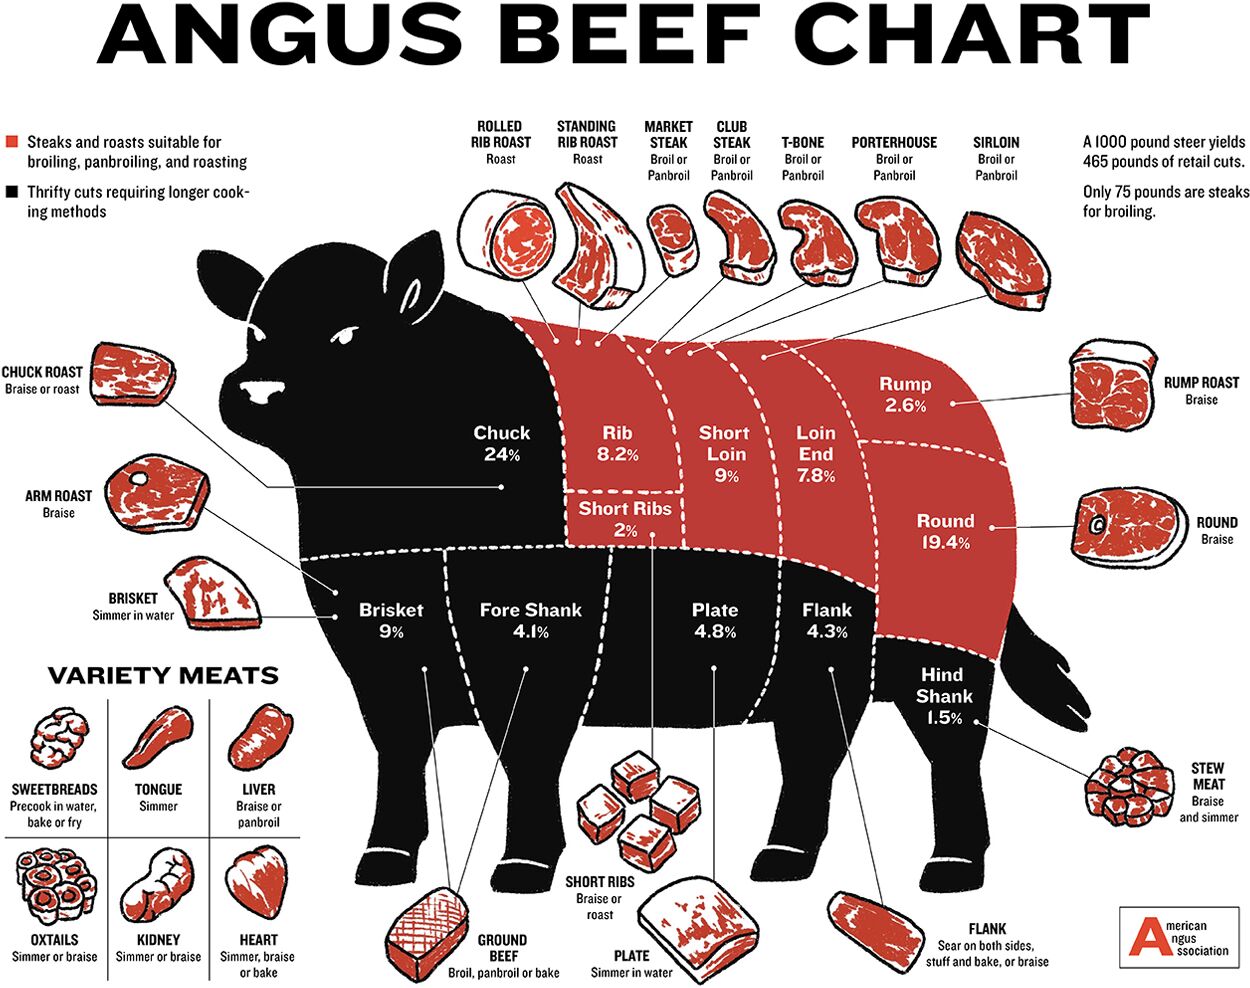 Angus Beef: What is It?